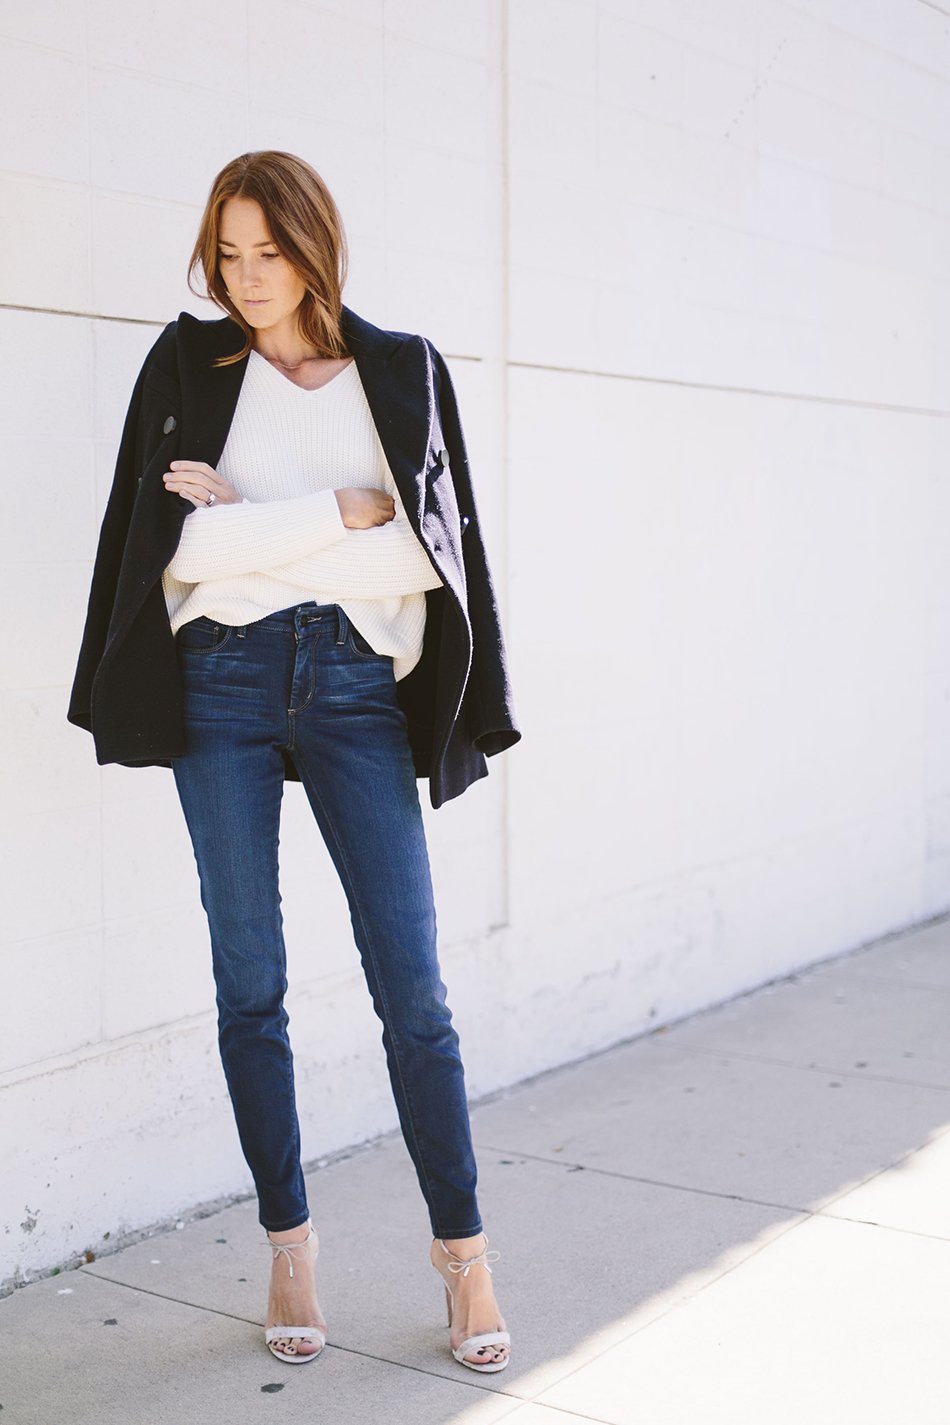 The Slimming Jean That Will Revolutionize Your Wardrobe